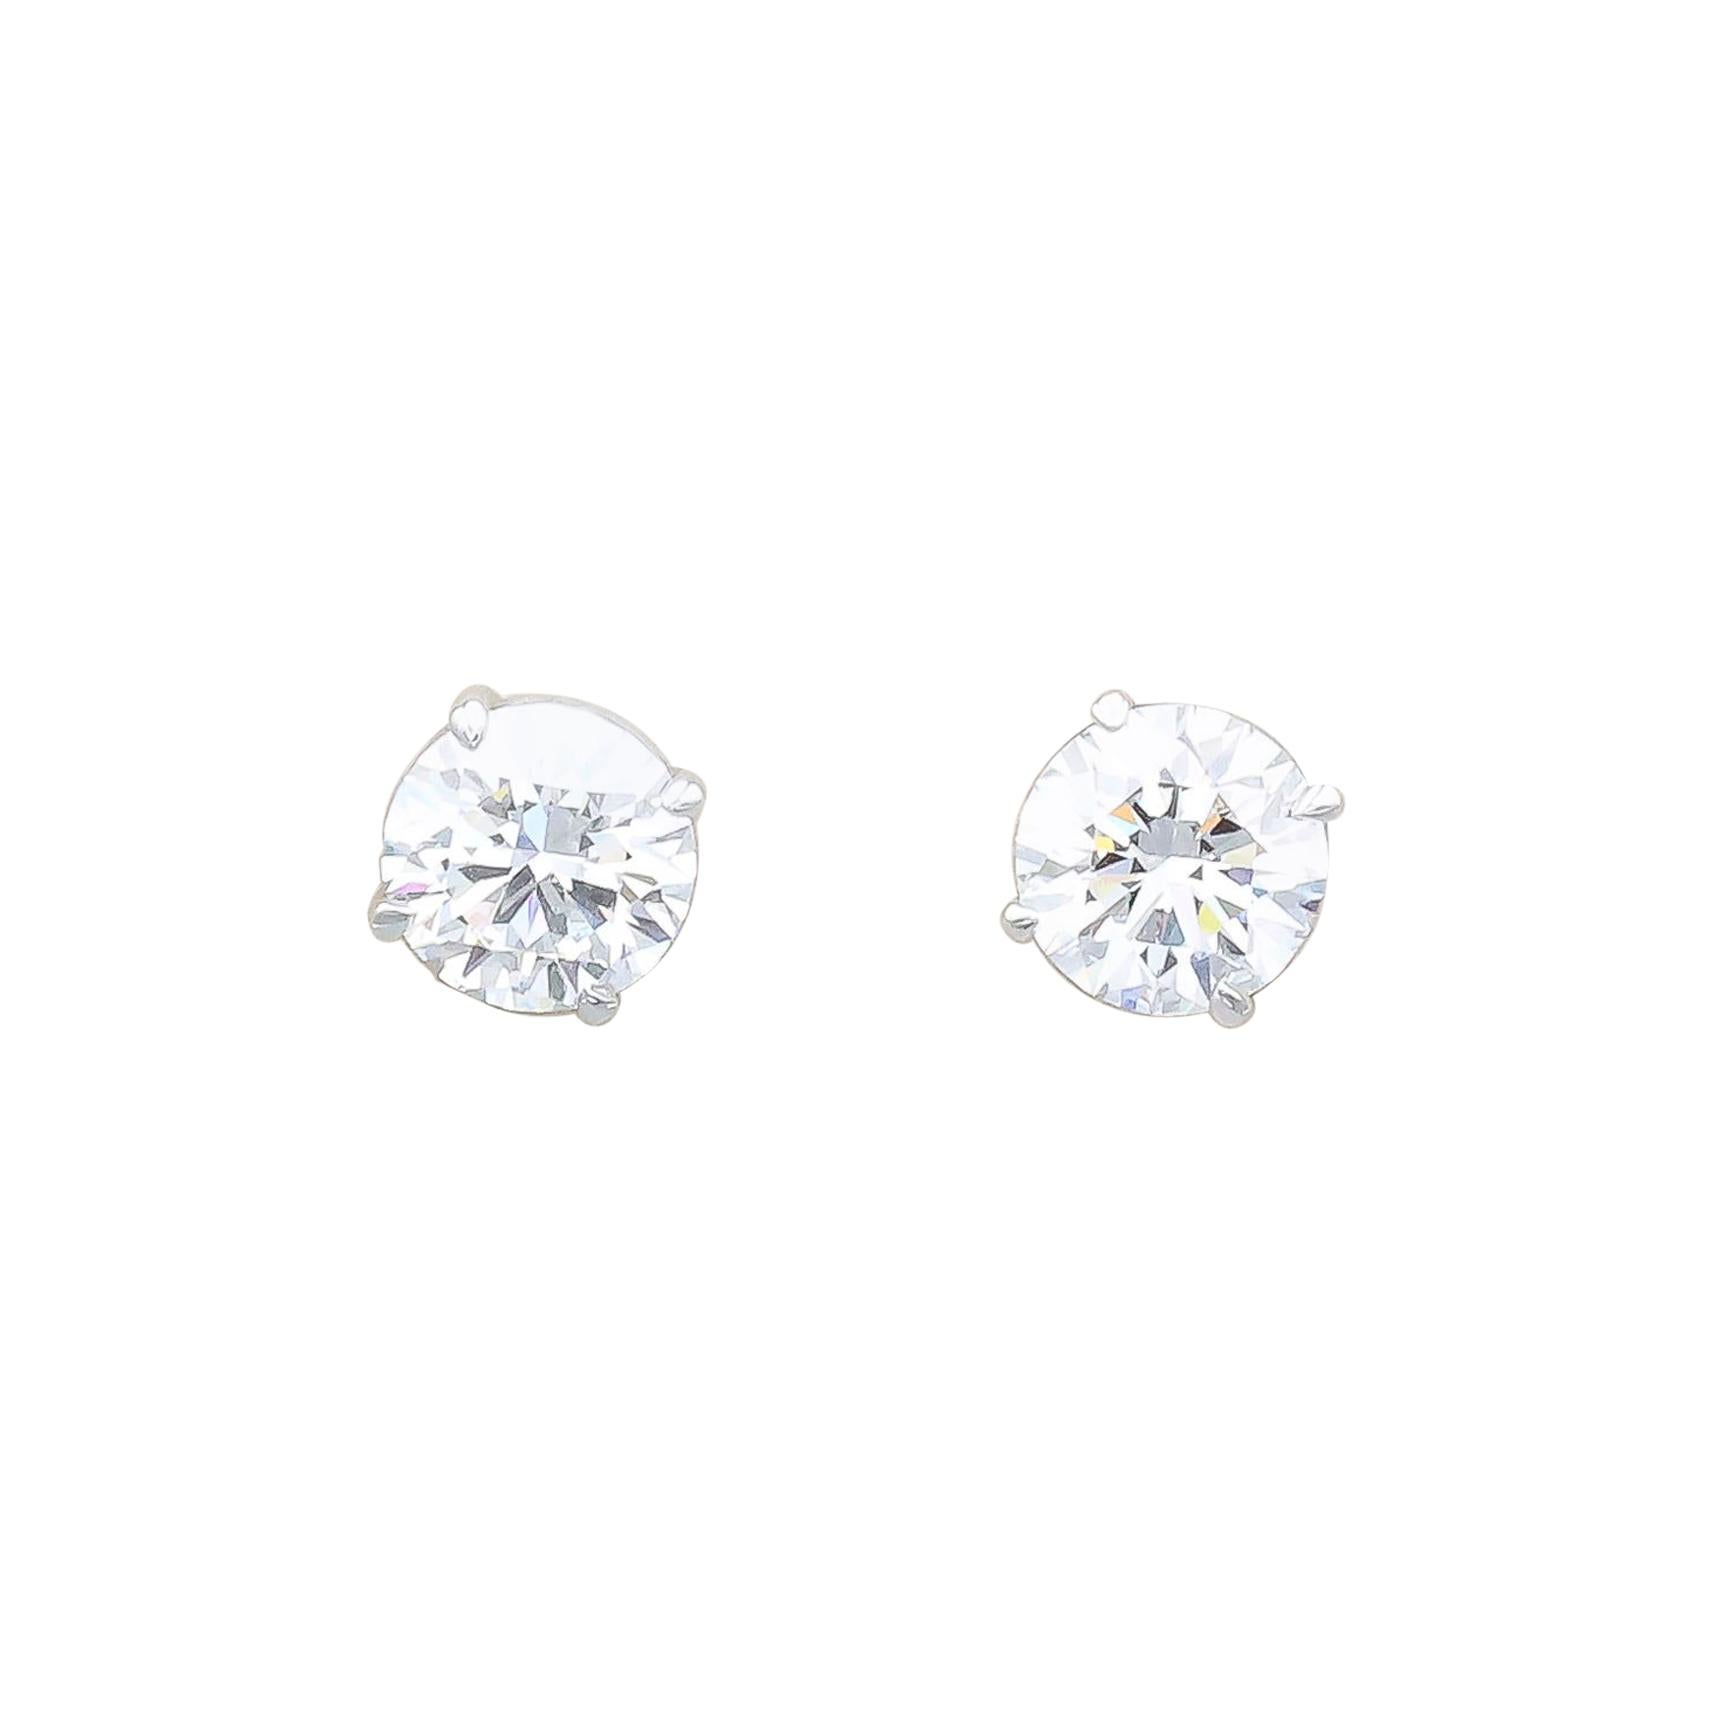 D Flawless 1.51 1.55 Diamond Platinum Stud Earrings with GIA Certification